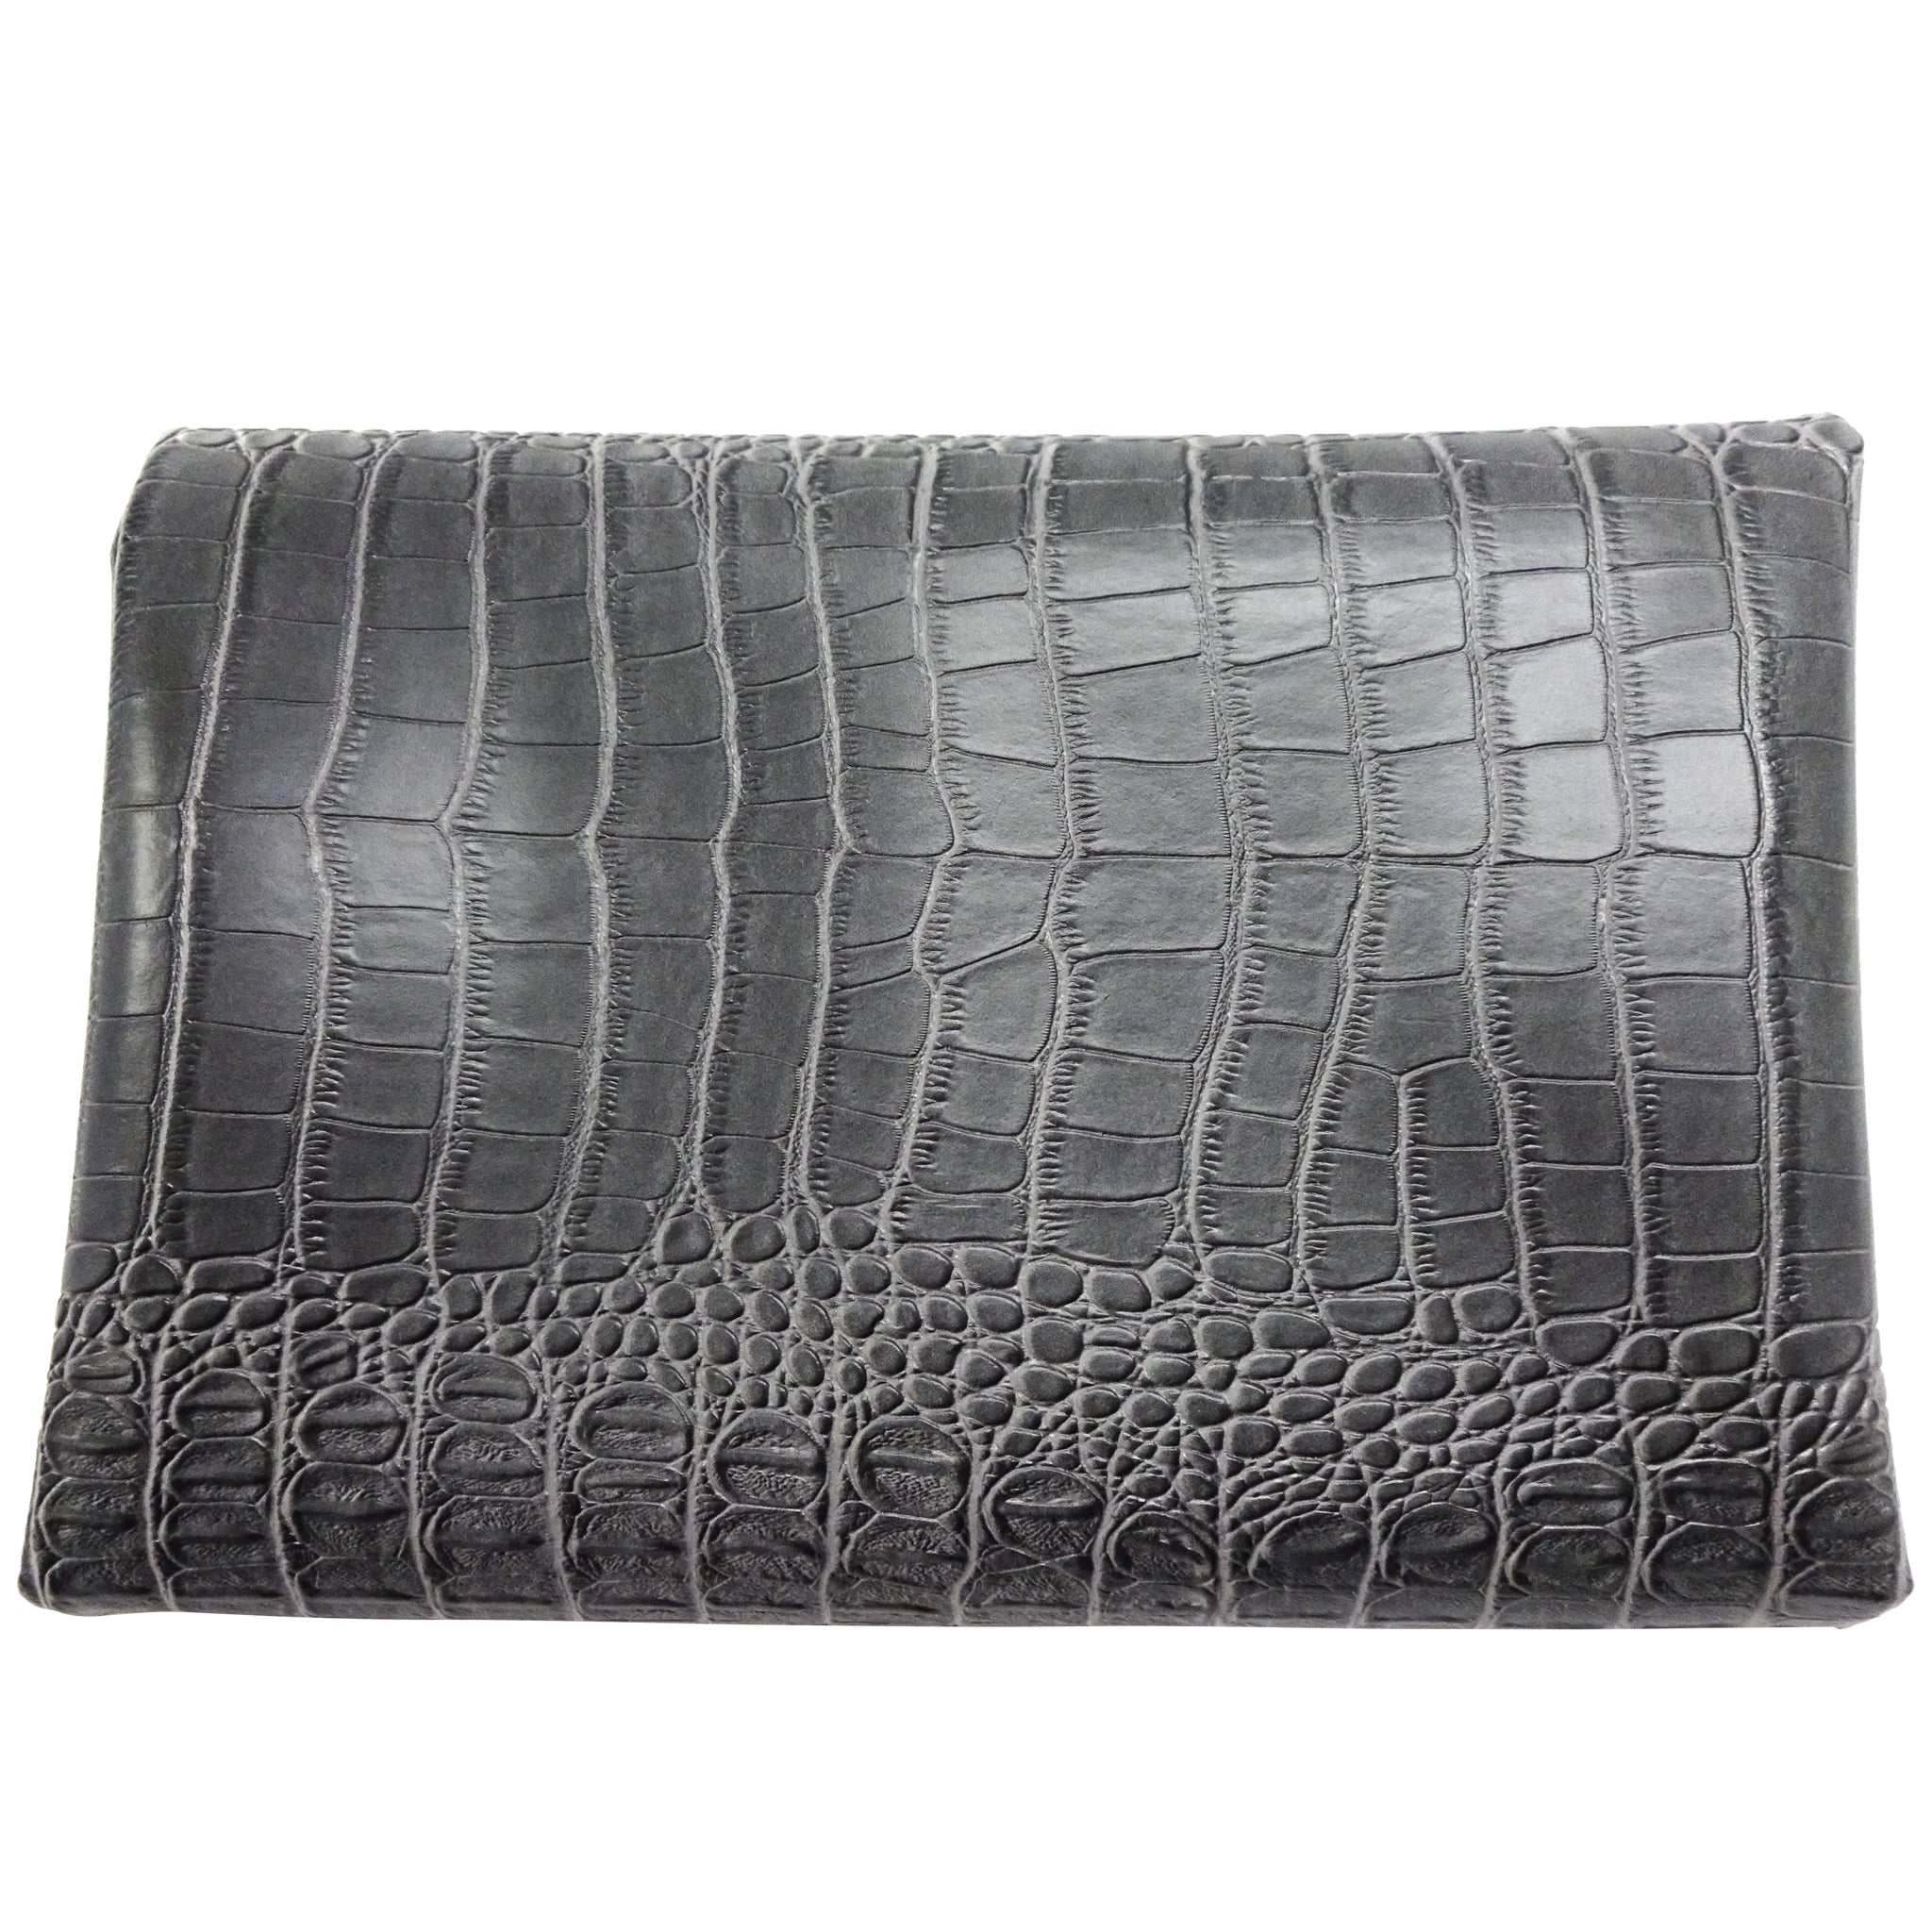 Shason Textile Faux Leather Crocodile Print Upholstery Fabric, Gray, Available in Multiple Colors, Size: 36 inch x 52 inch